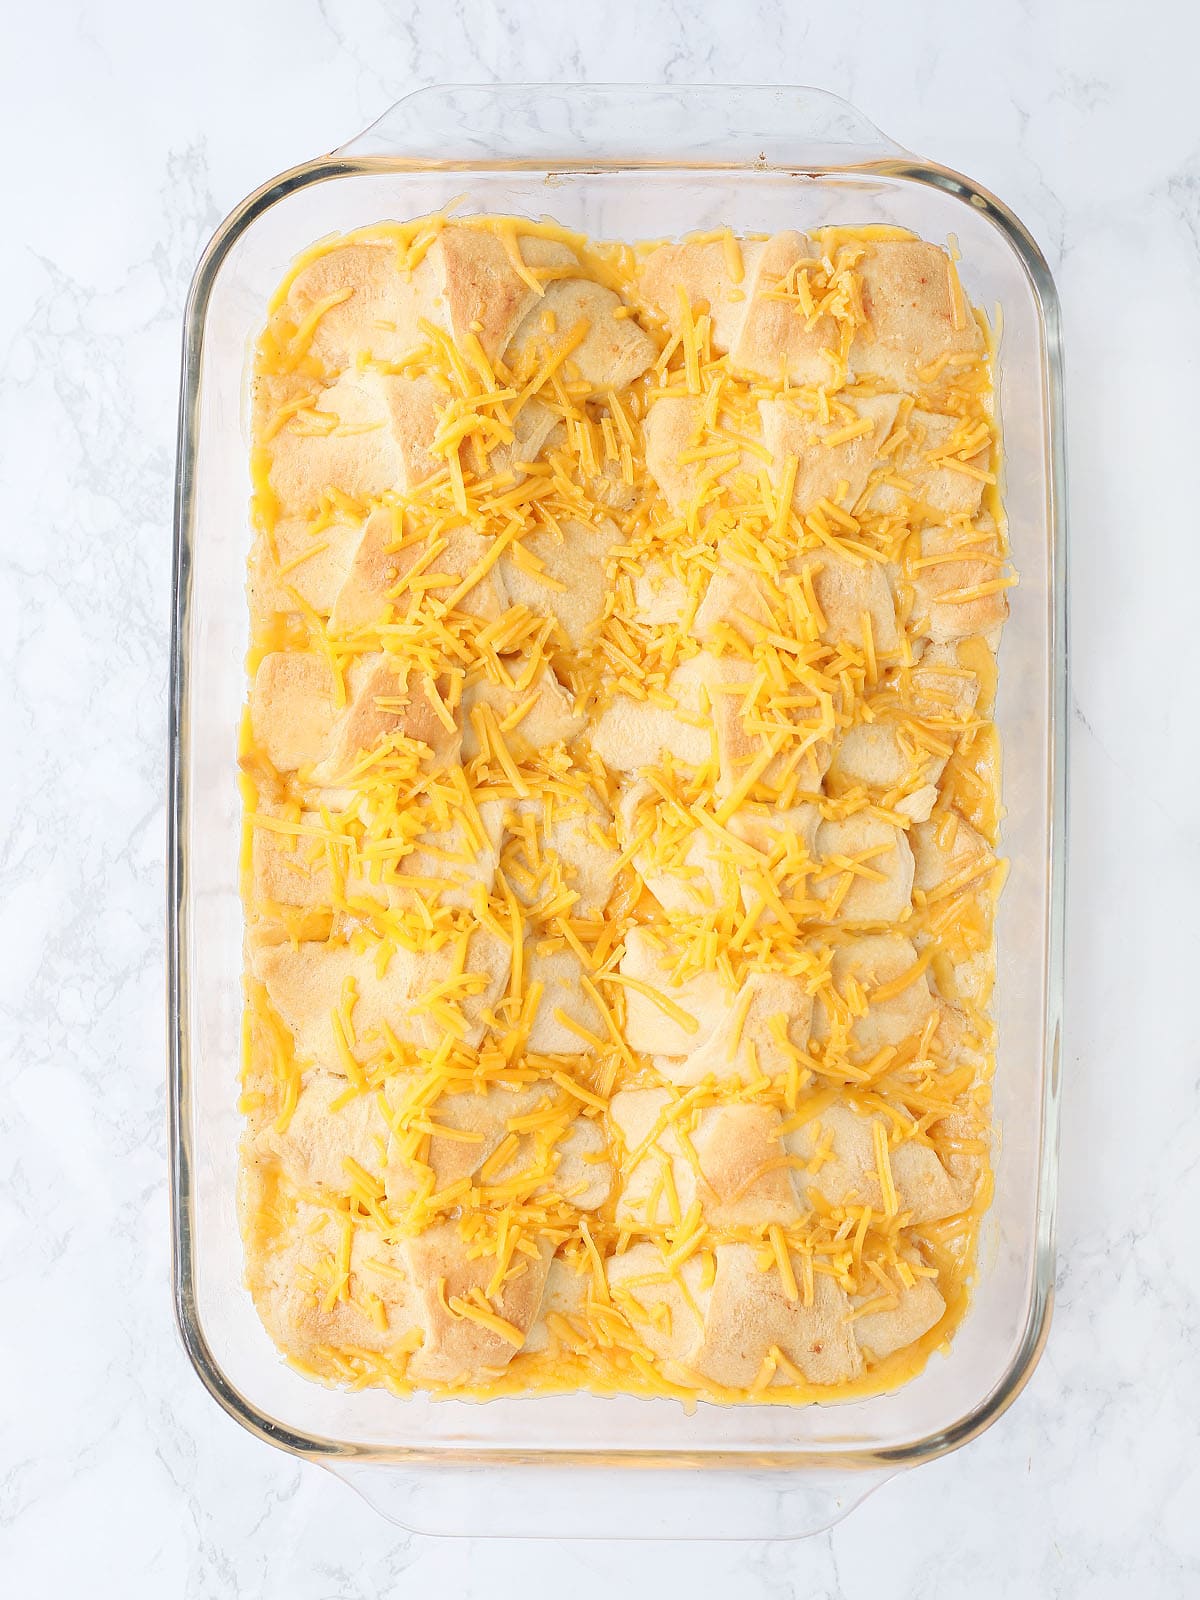 unbaked crescent chicken topped with cheese in a glass casserole dish